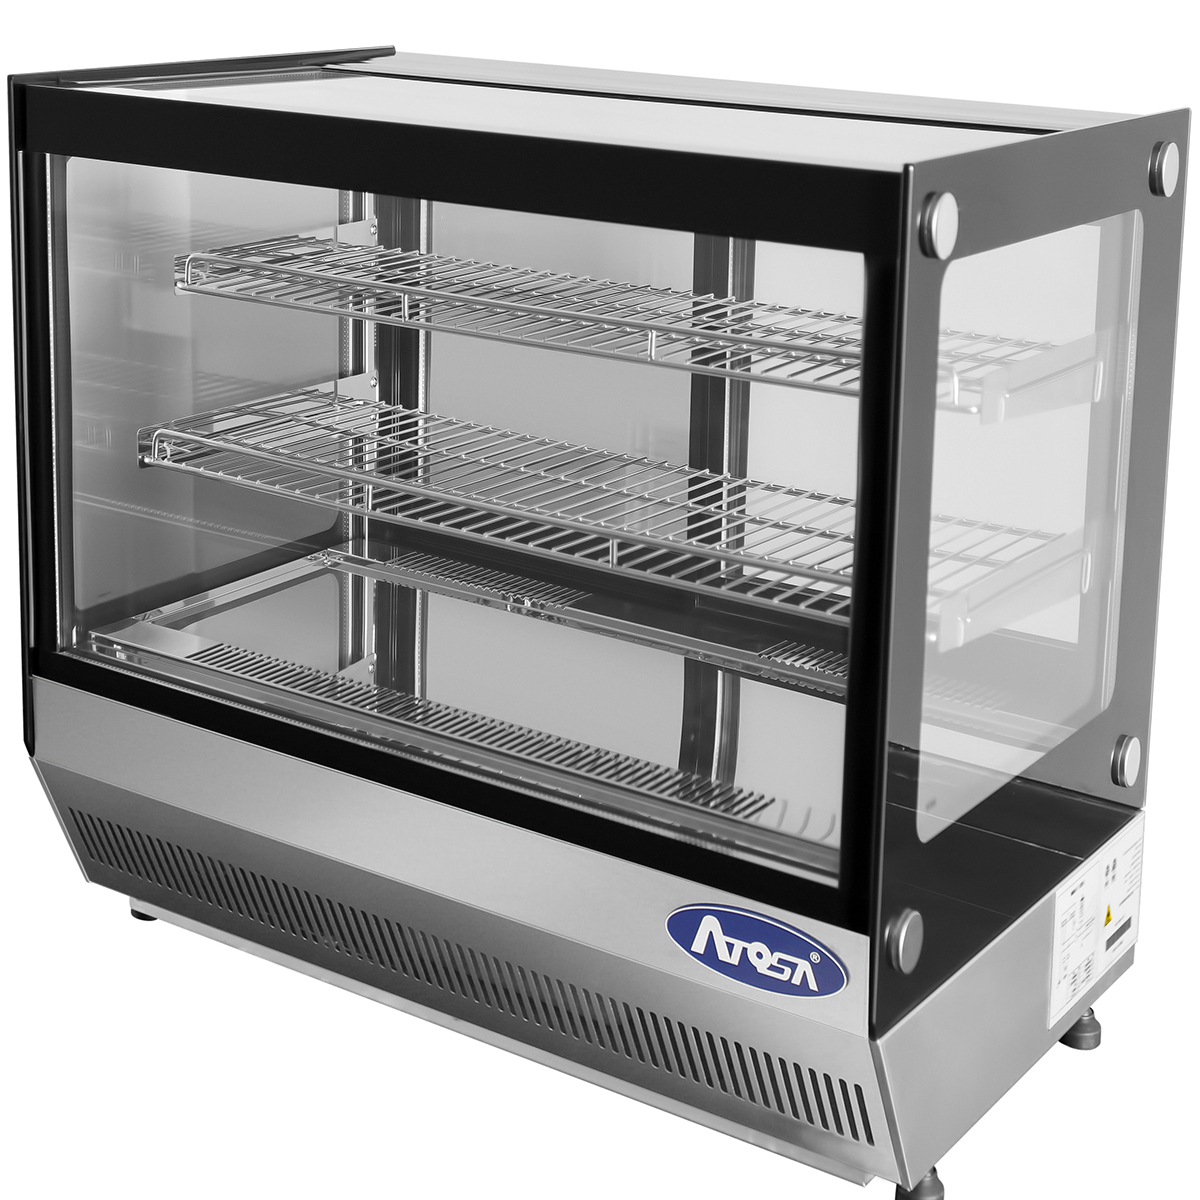 Atosa CRDS-56 Refrigerated Countertop Display Case 35-2/5"W, 5.6 Cu. Ft. image 2